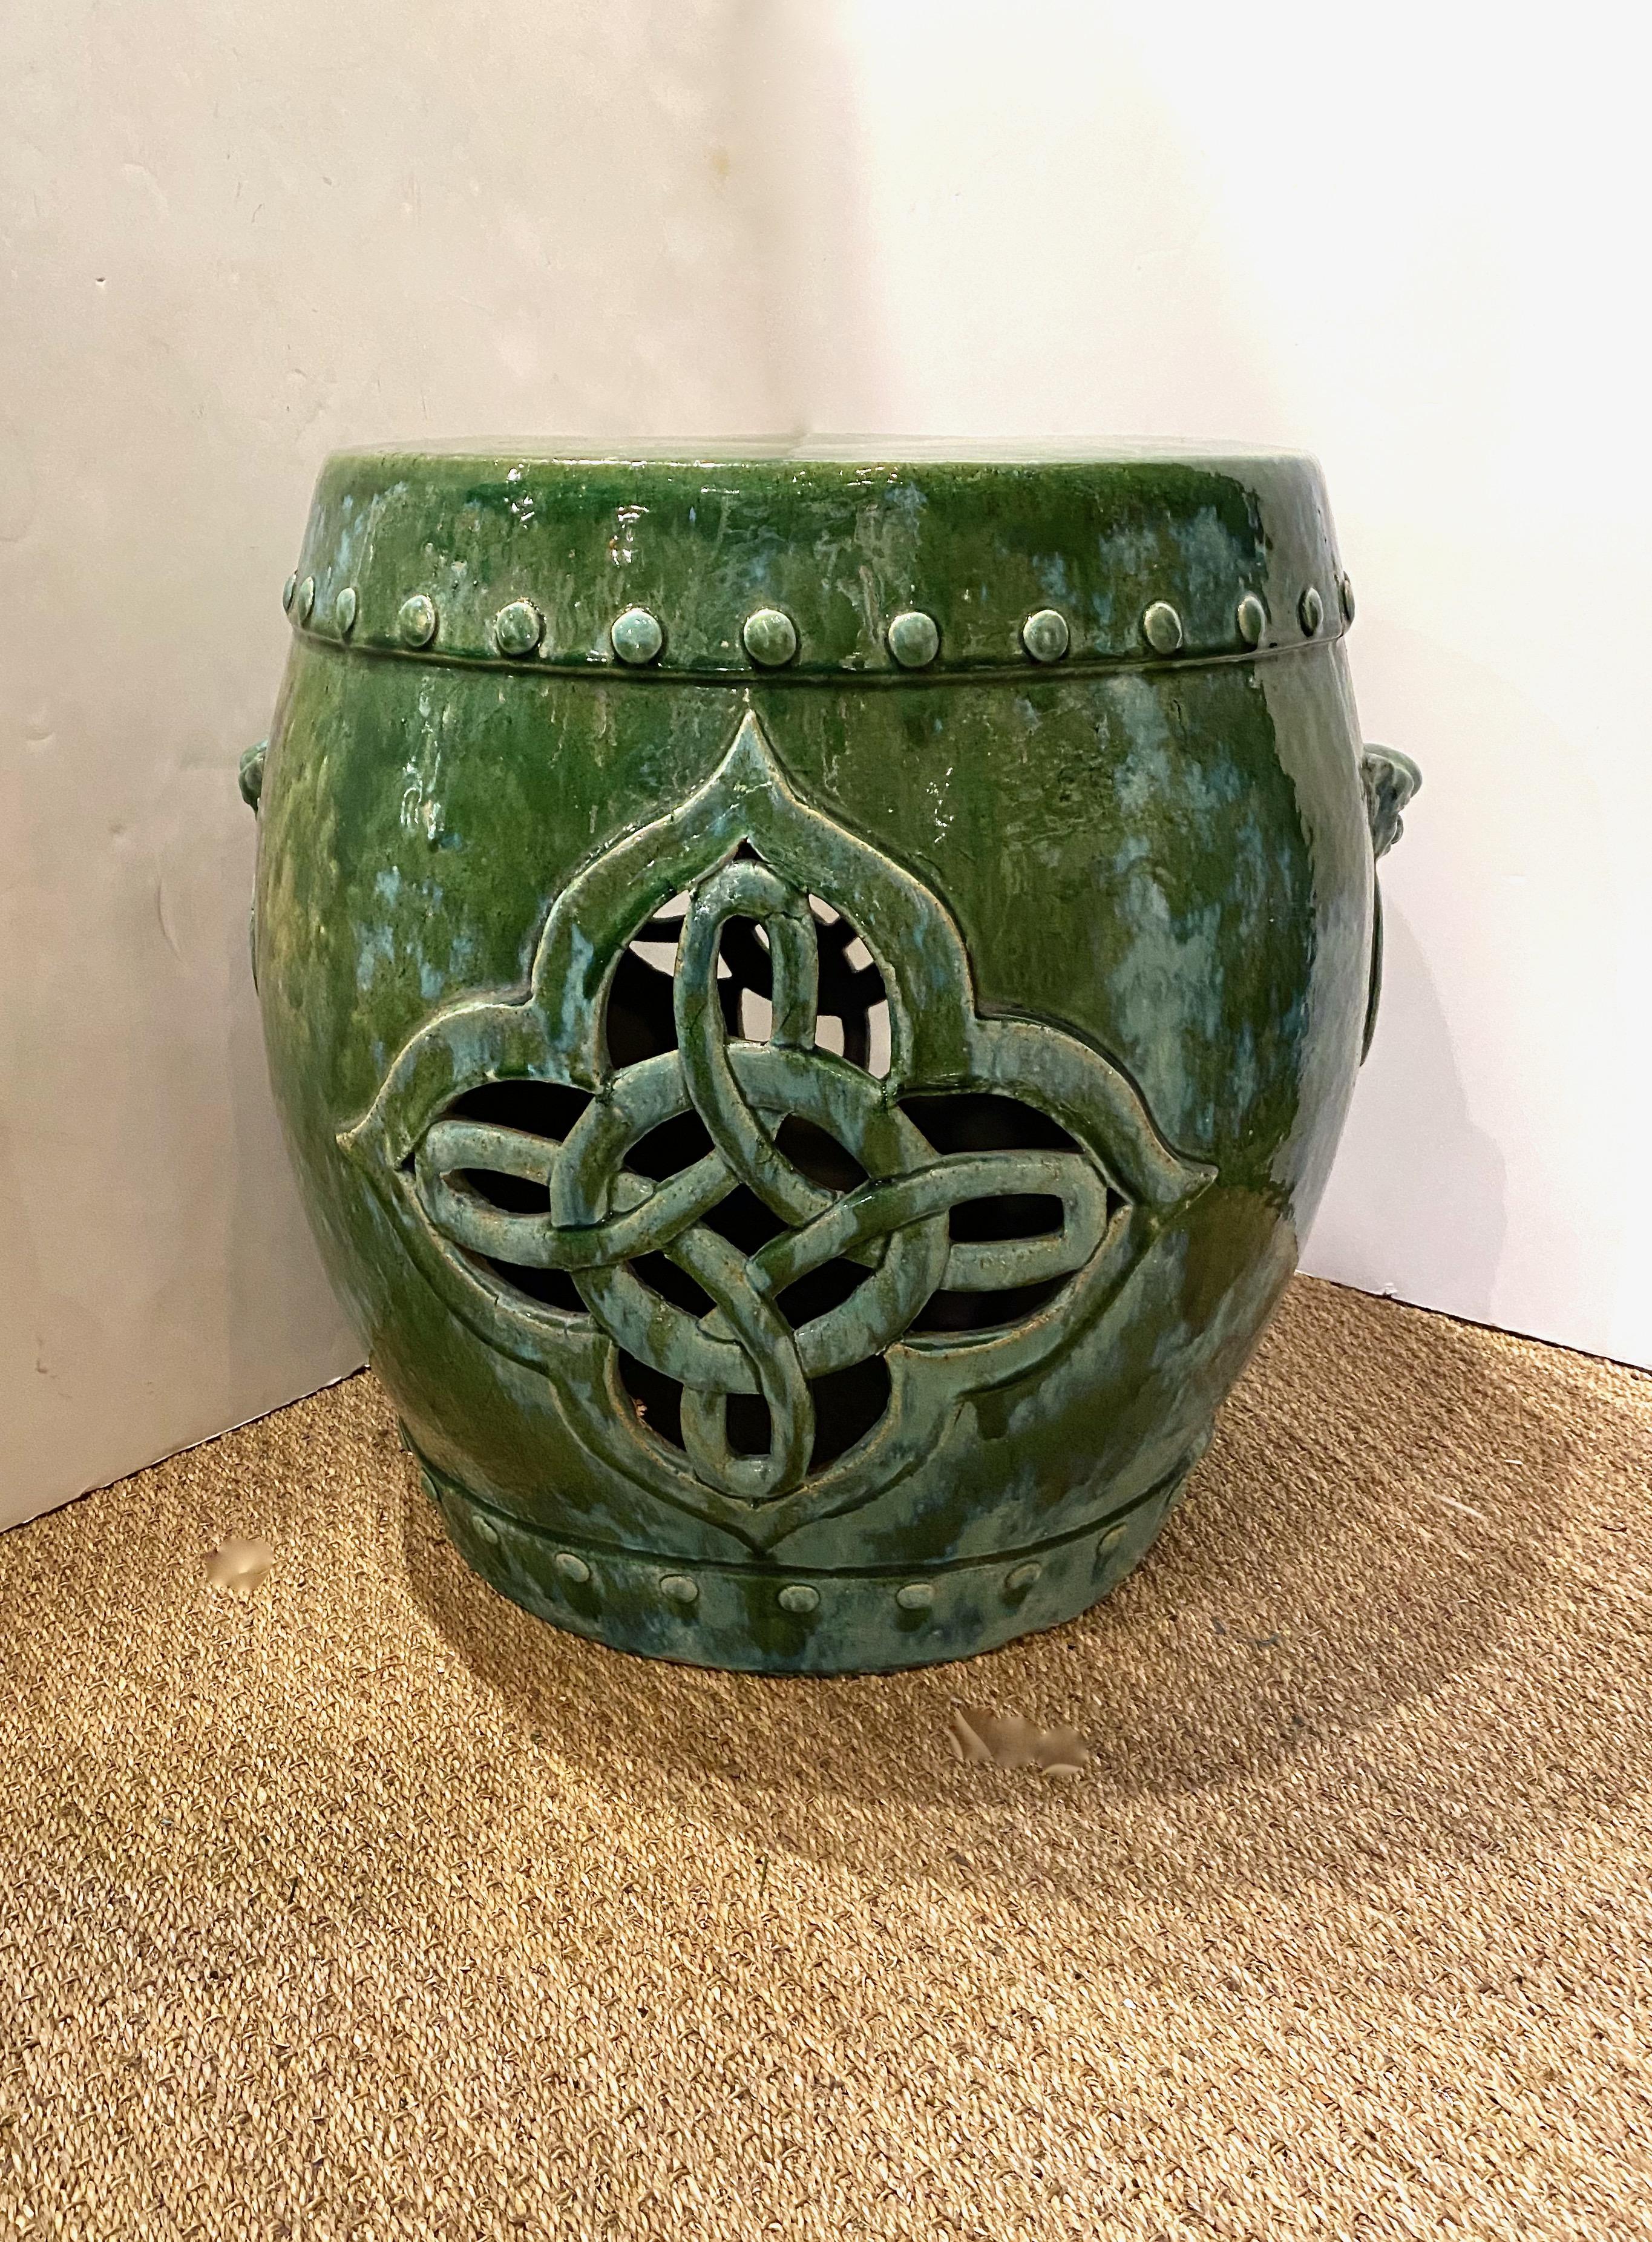 This a large glazed terra cotta table in the form of a traditional Chinese drum. The table dates to the late 19th or early 20th century and is in overall very good condition considering its many years of use. The traditional green is highlighted